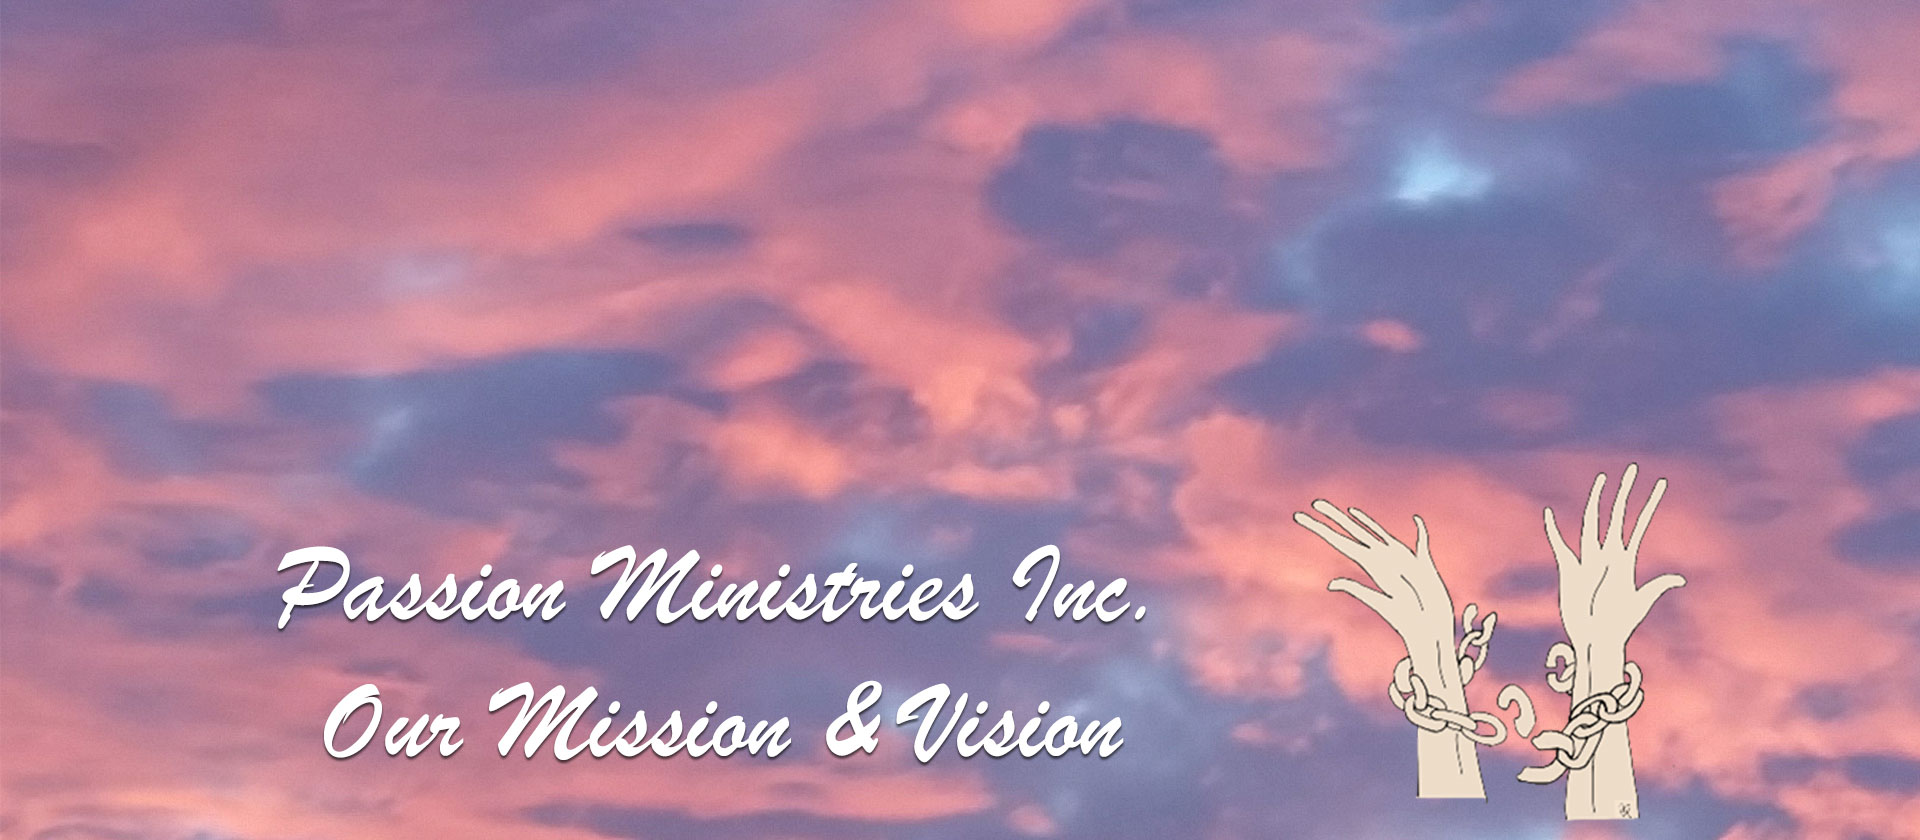 Passion Ministries Mission & Vision